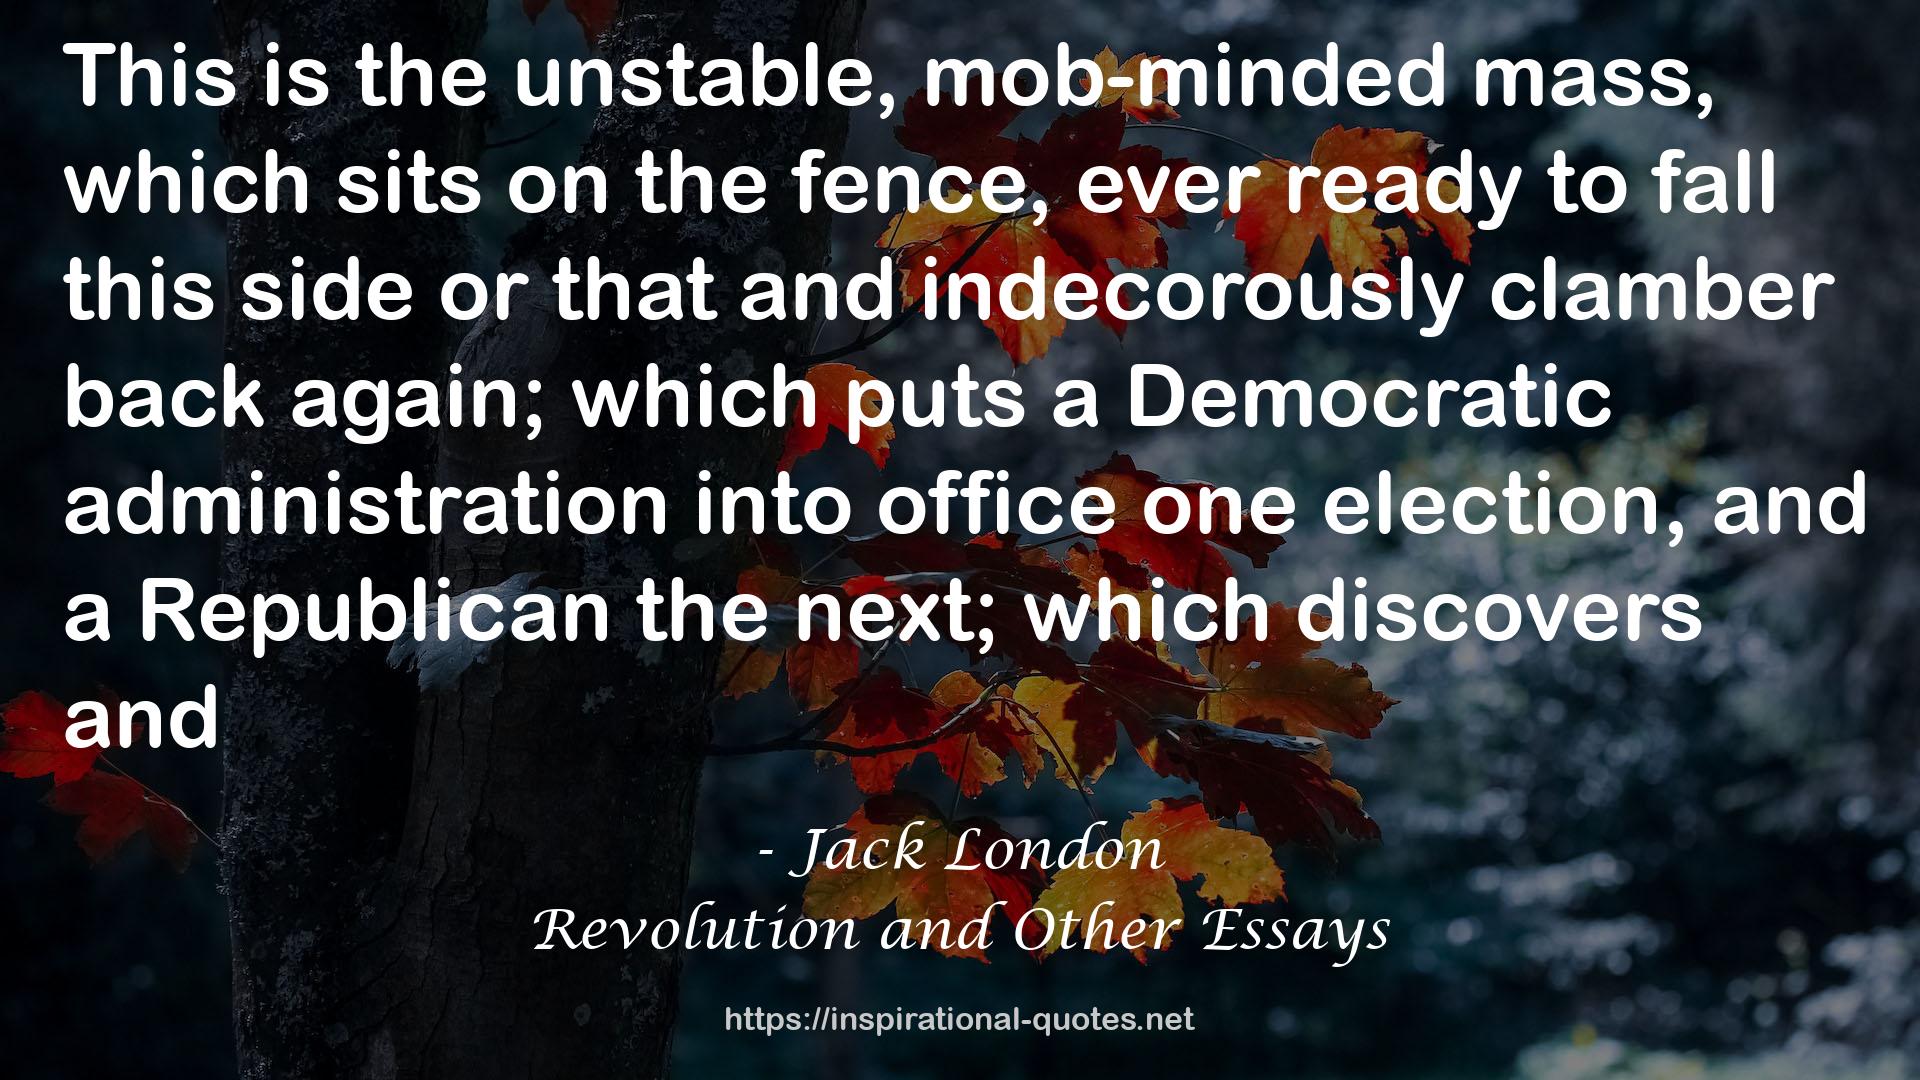 Revolution and Other Essays QUOTES